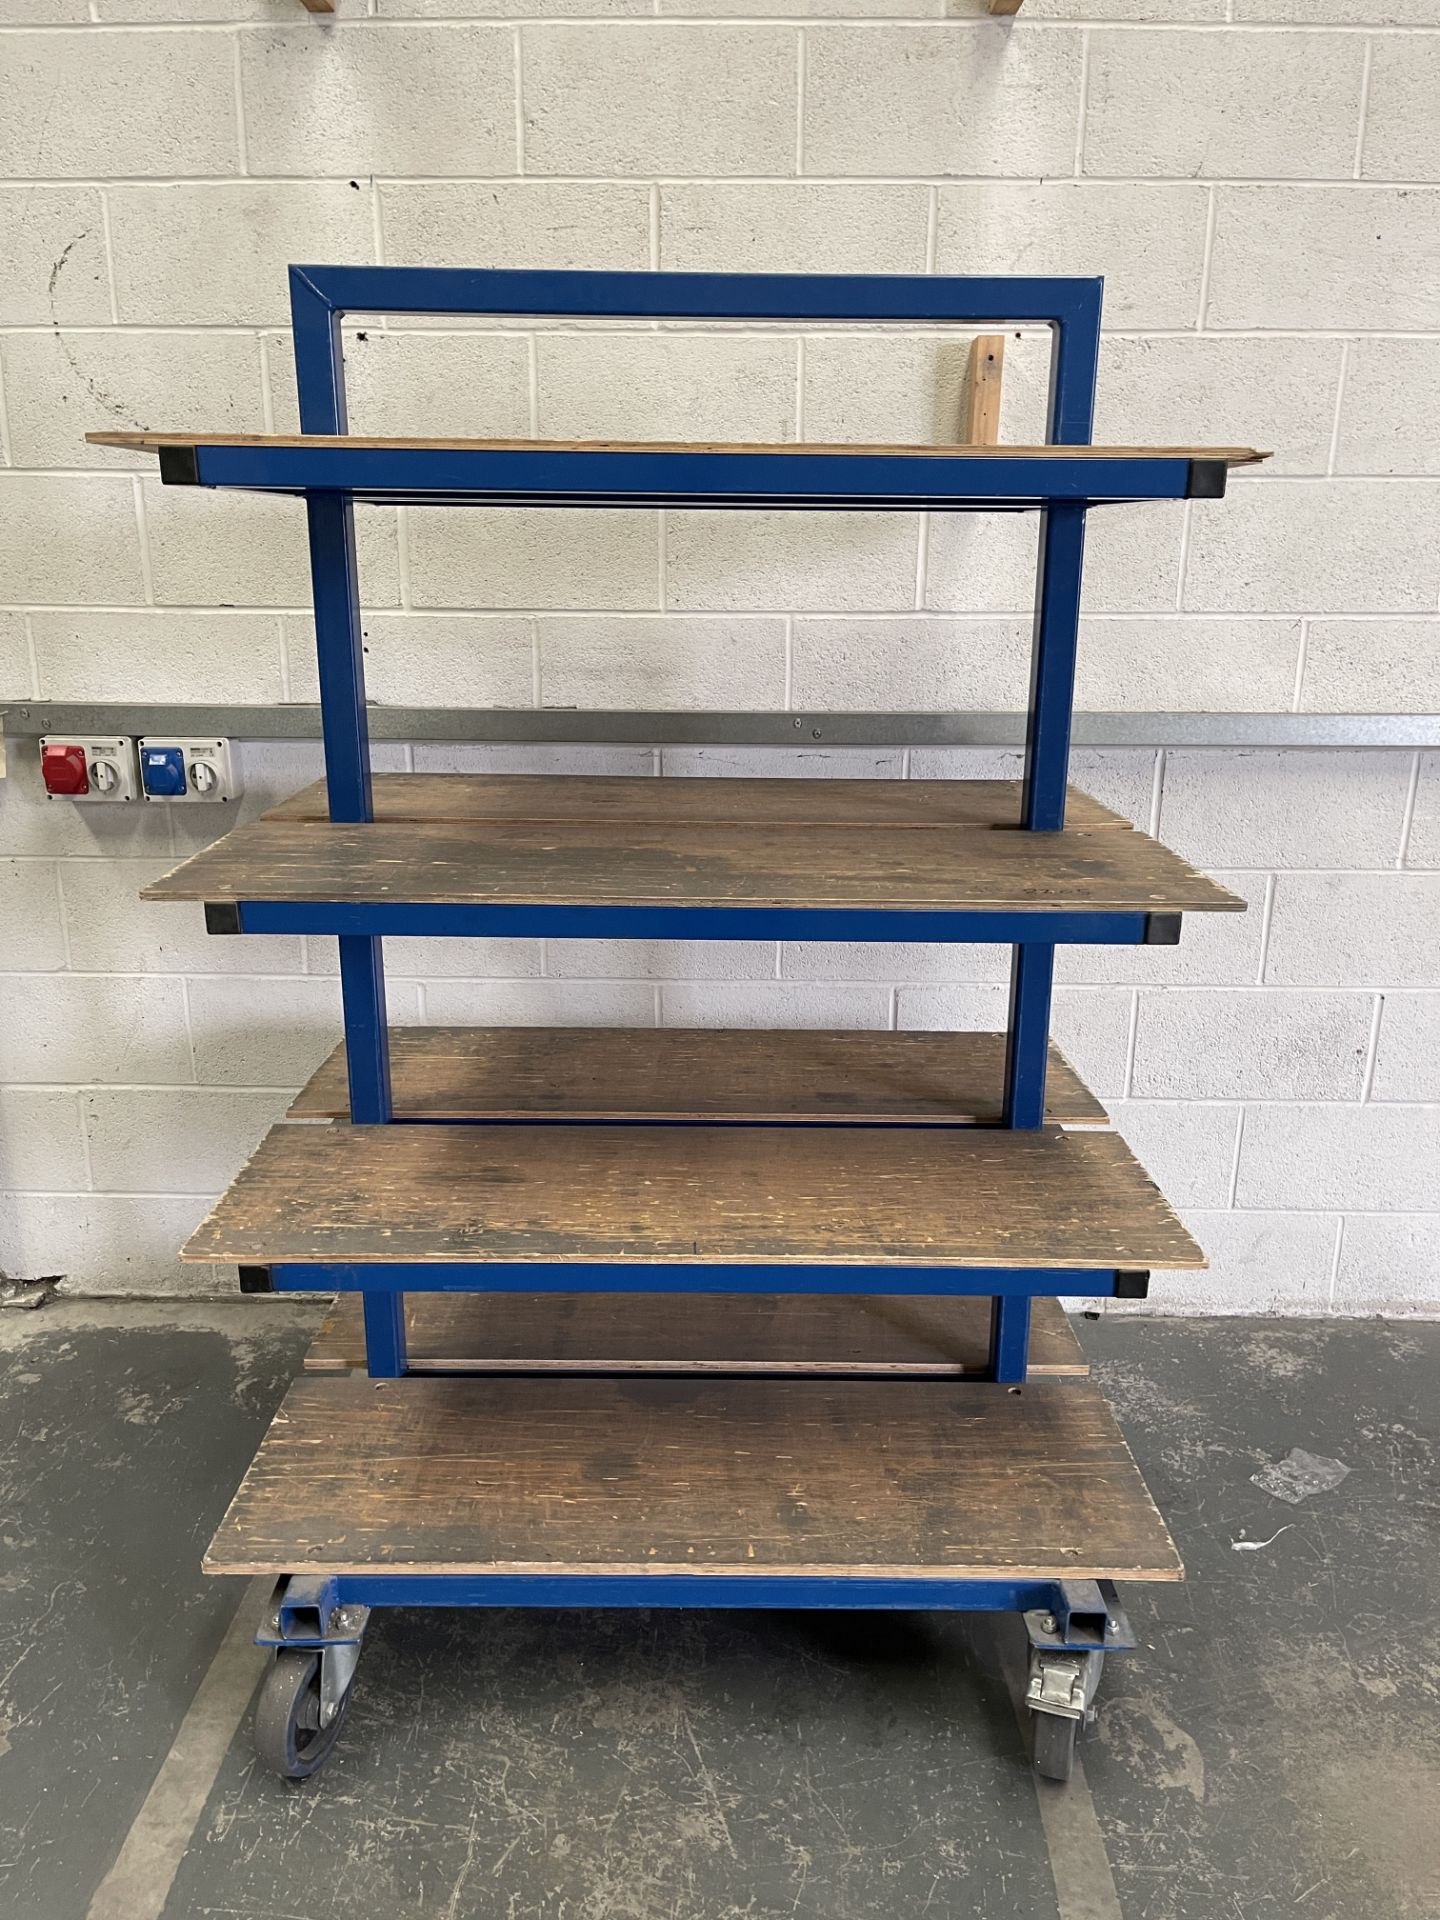 Heavy Duty Mobile Work Trolley. Steel Tube Construction With Wooden Shelving.